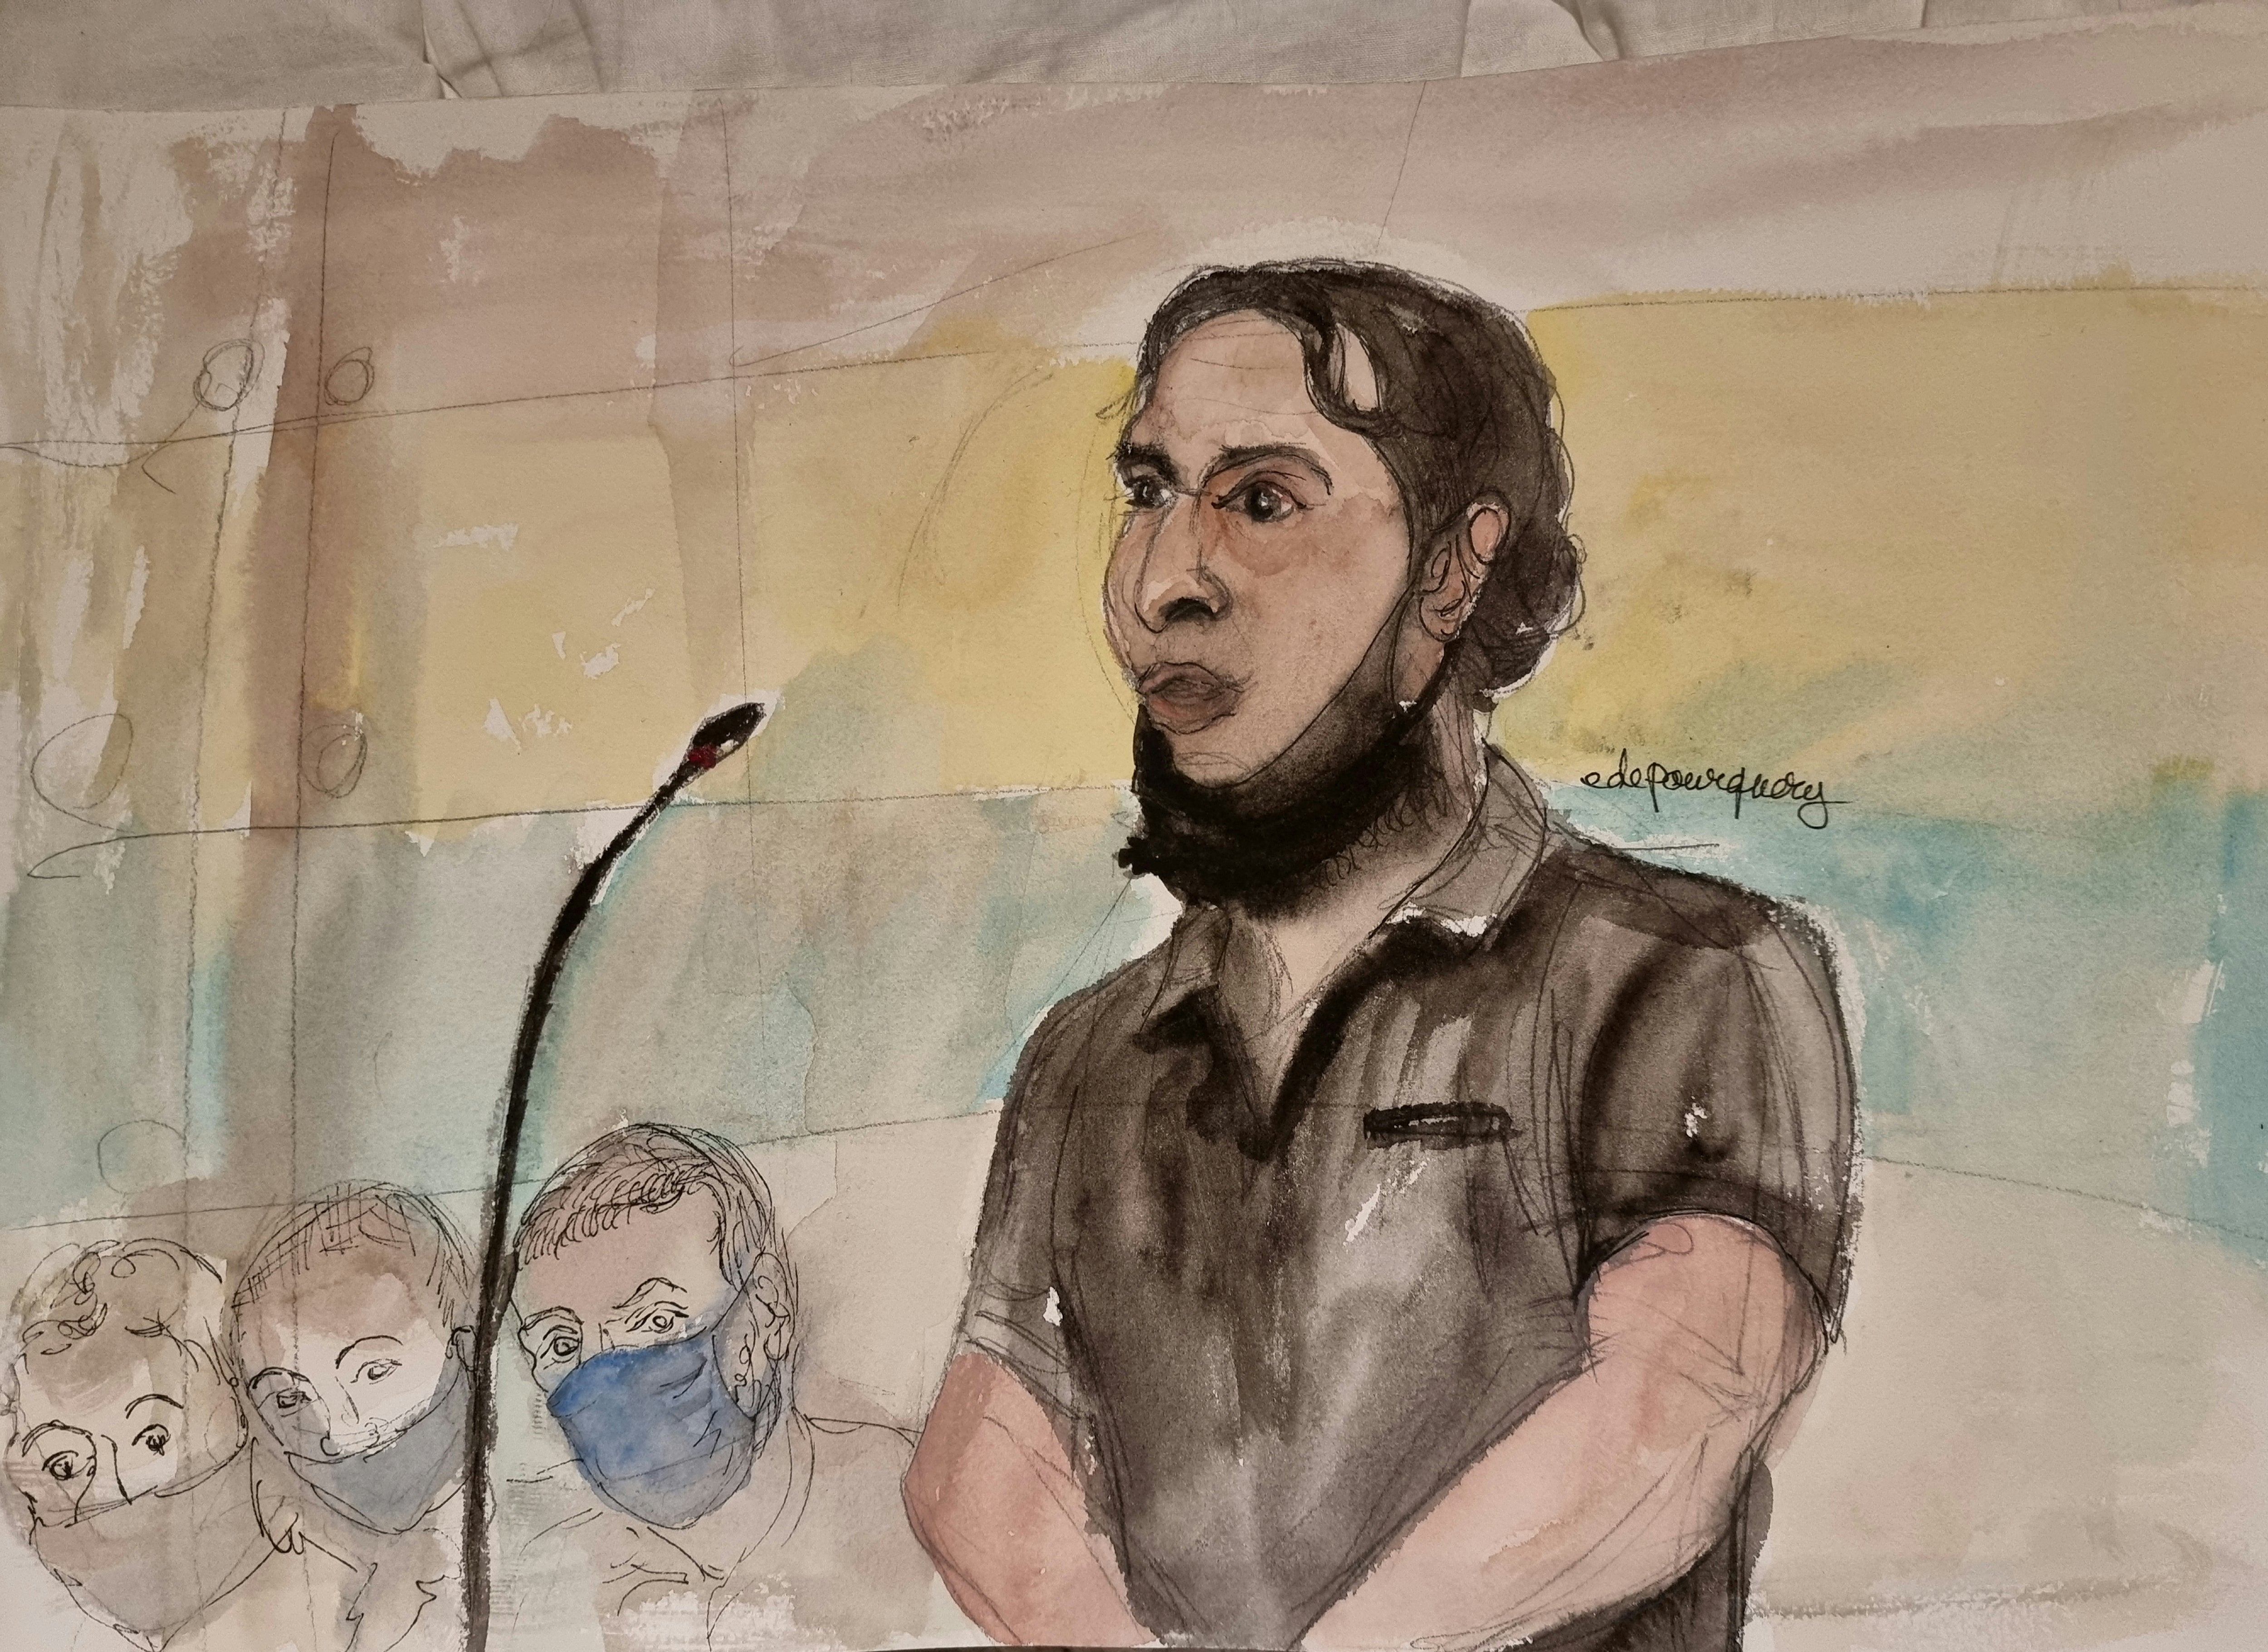 An artist’s sketch of Salah Abdeslam at this trial in France